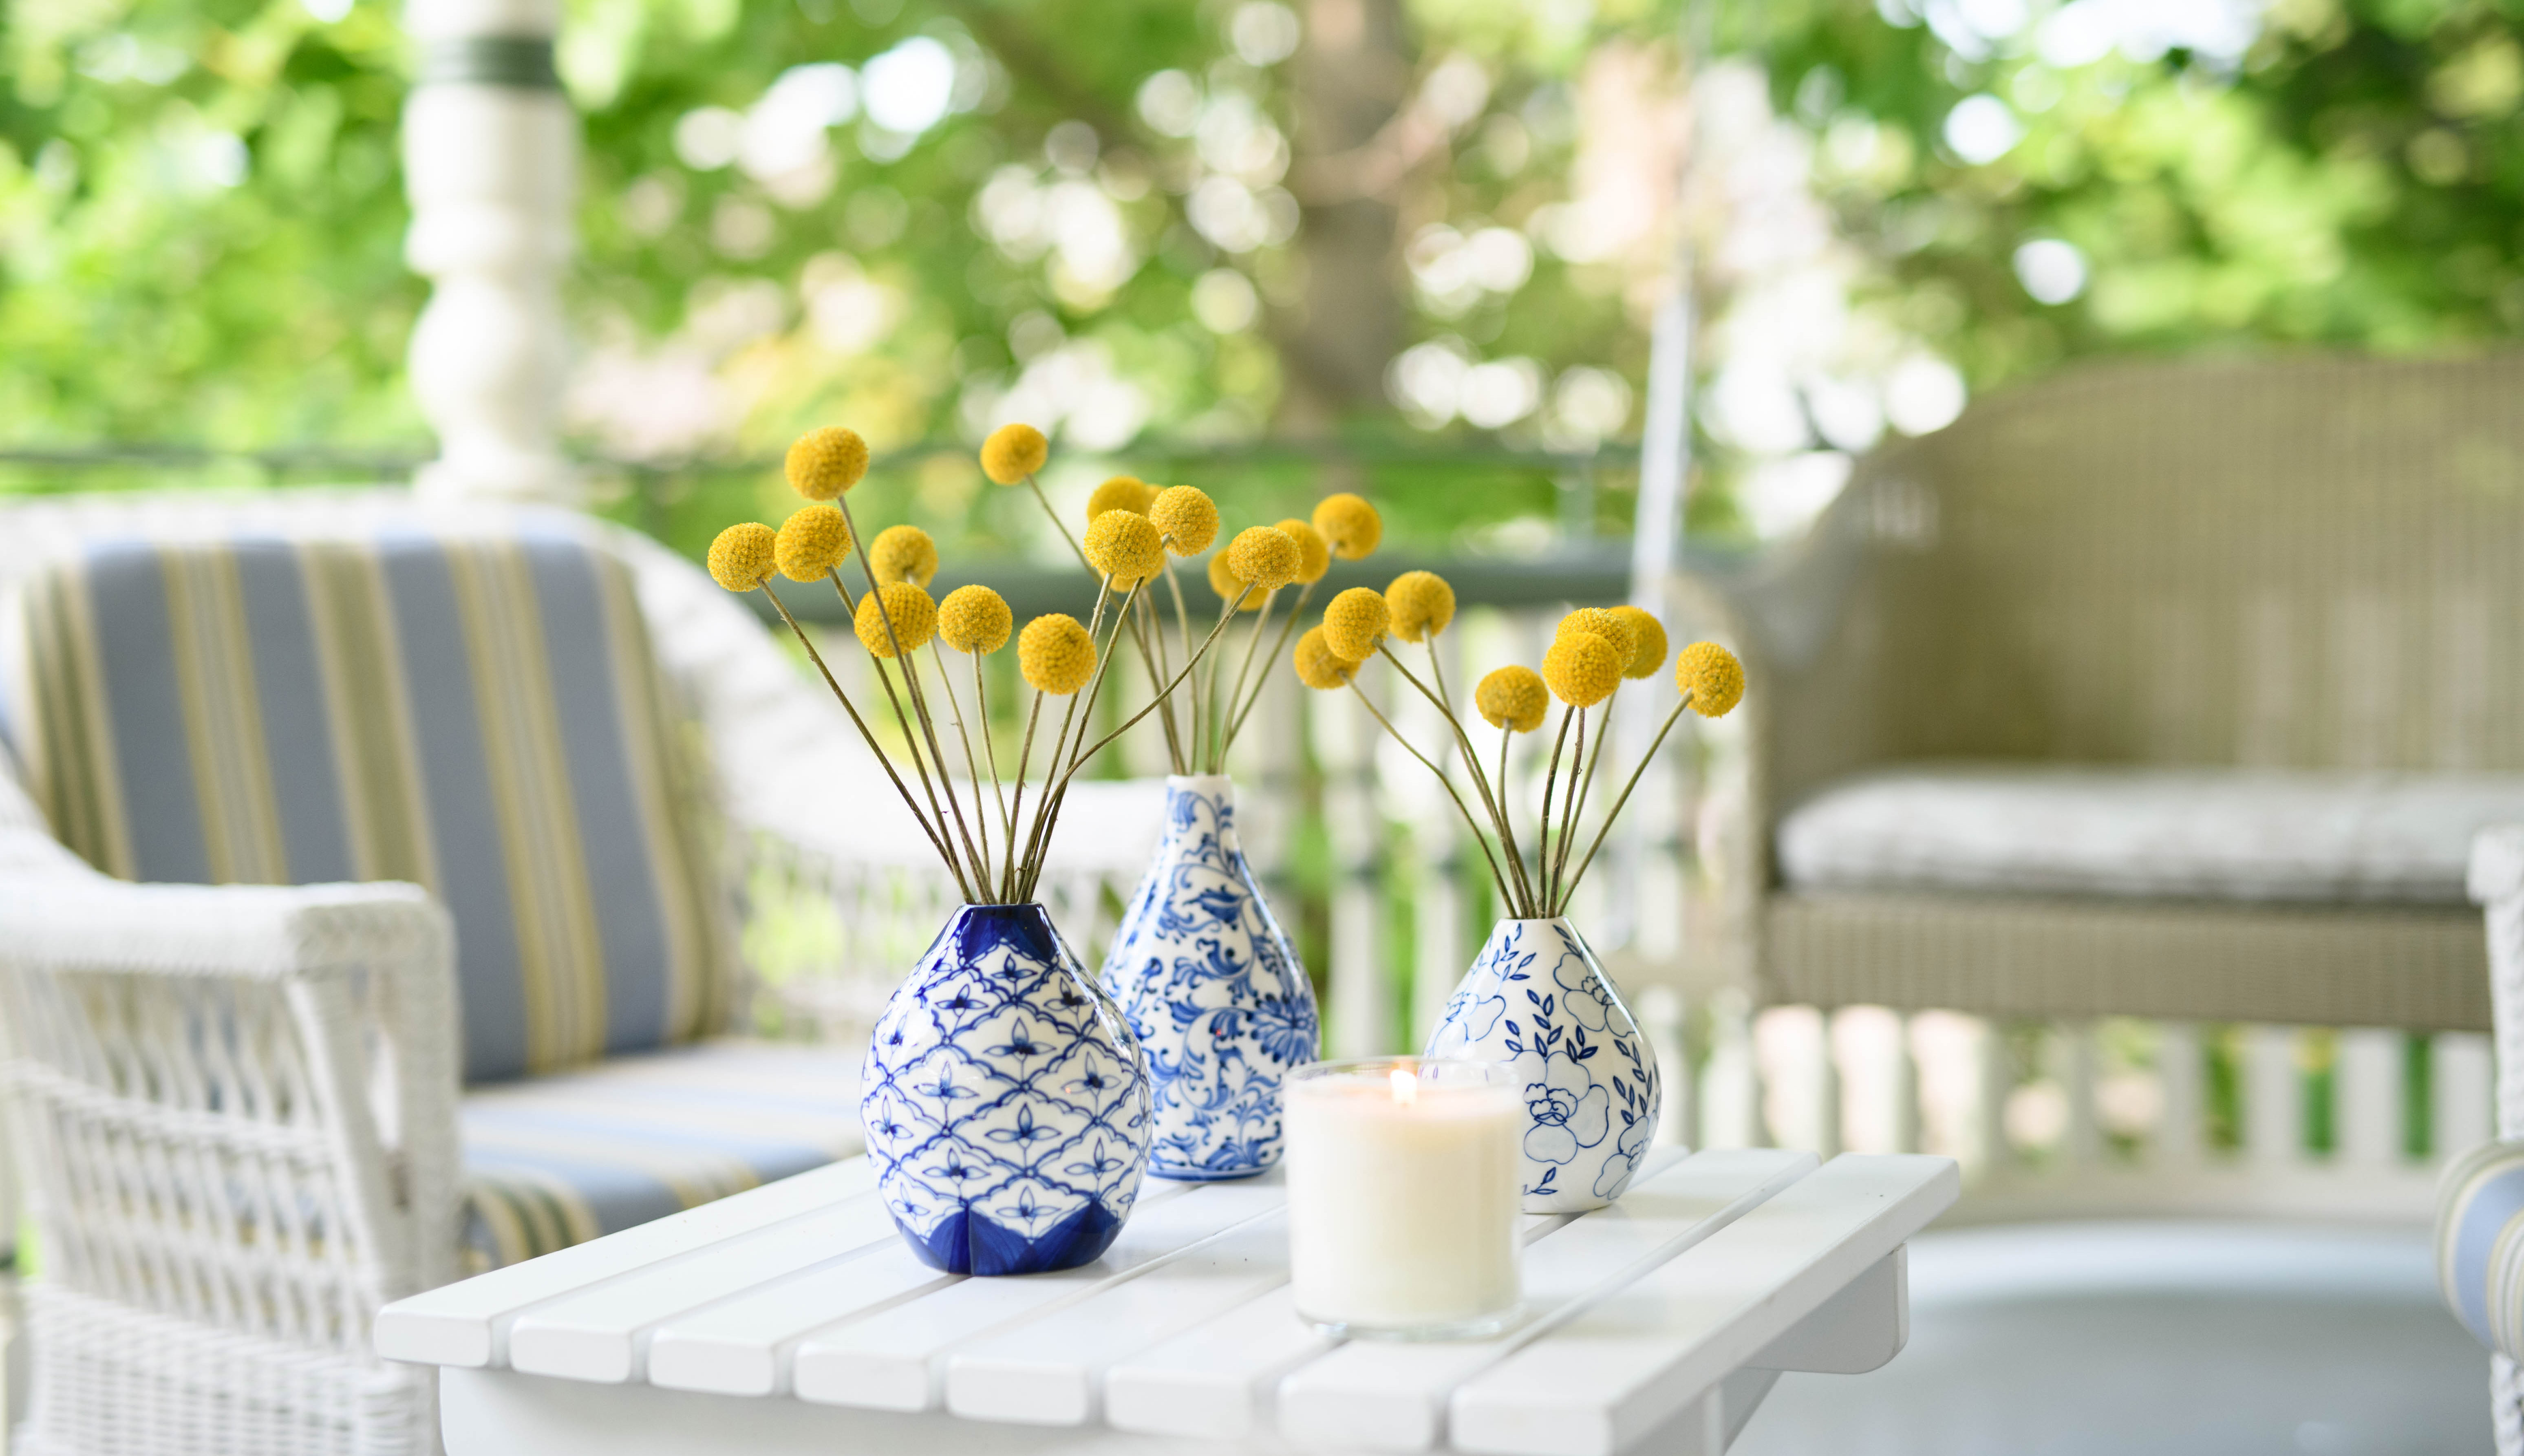 Three blue and white ceramic vases with yellow flowers on an outdoor patio